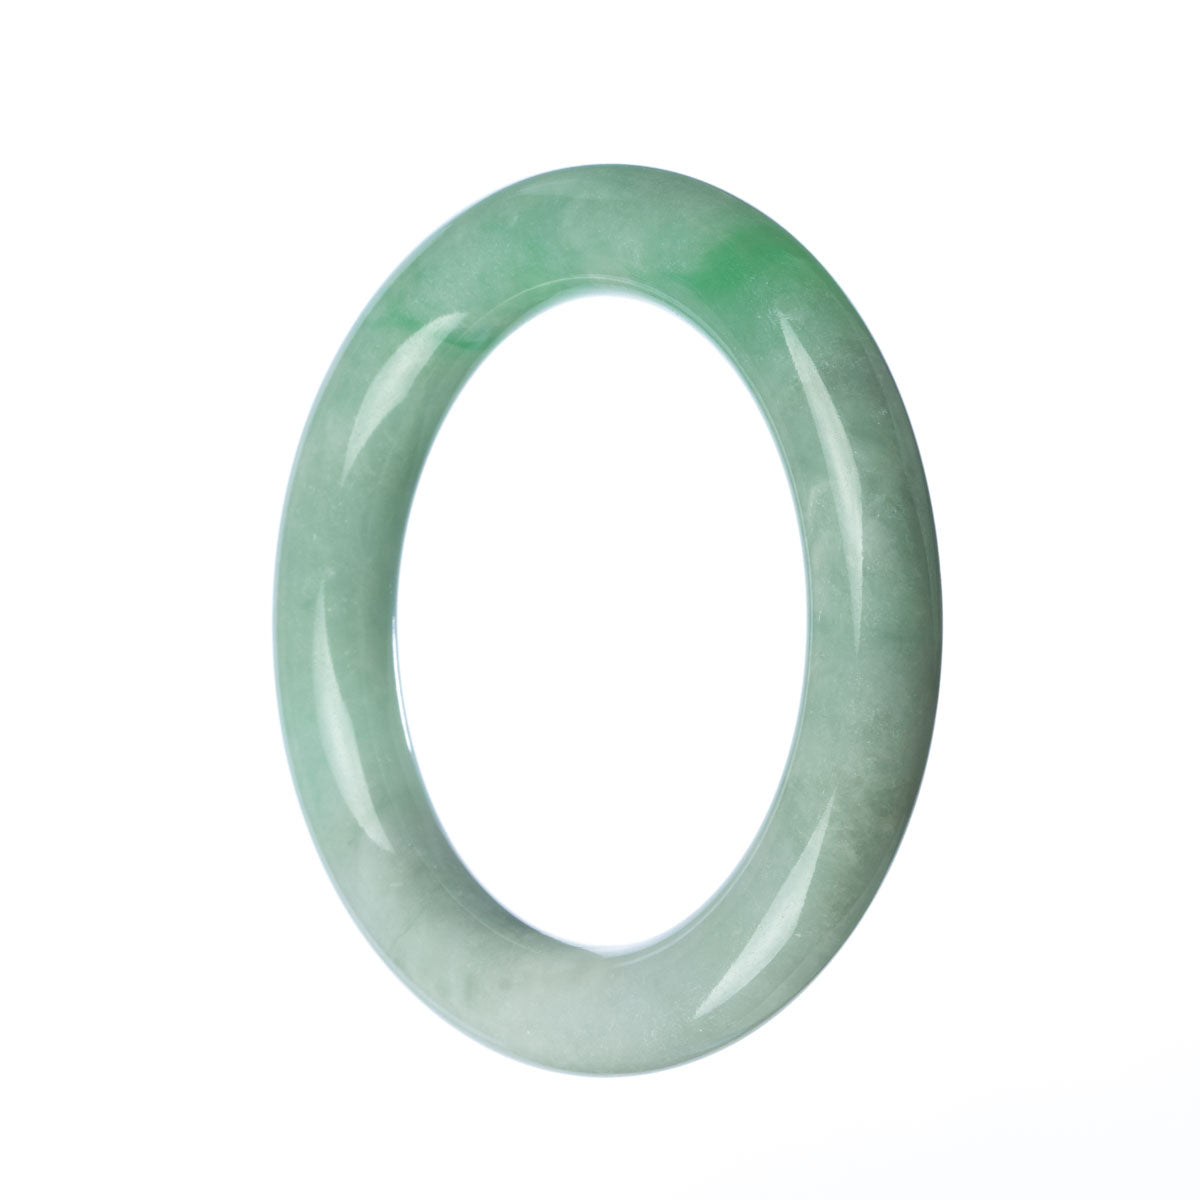 A close-up of a round, green jade bangle bracelet, with a smooth surface and a vibrant color.